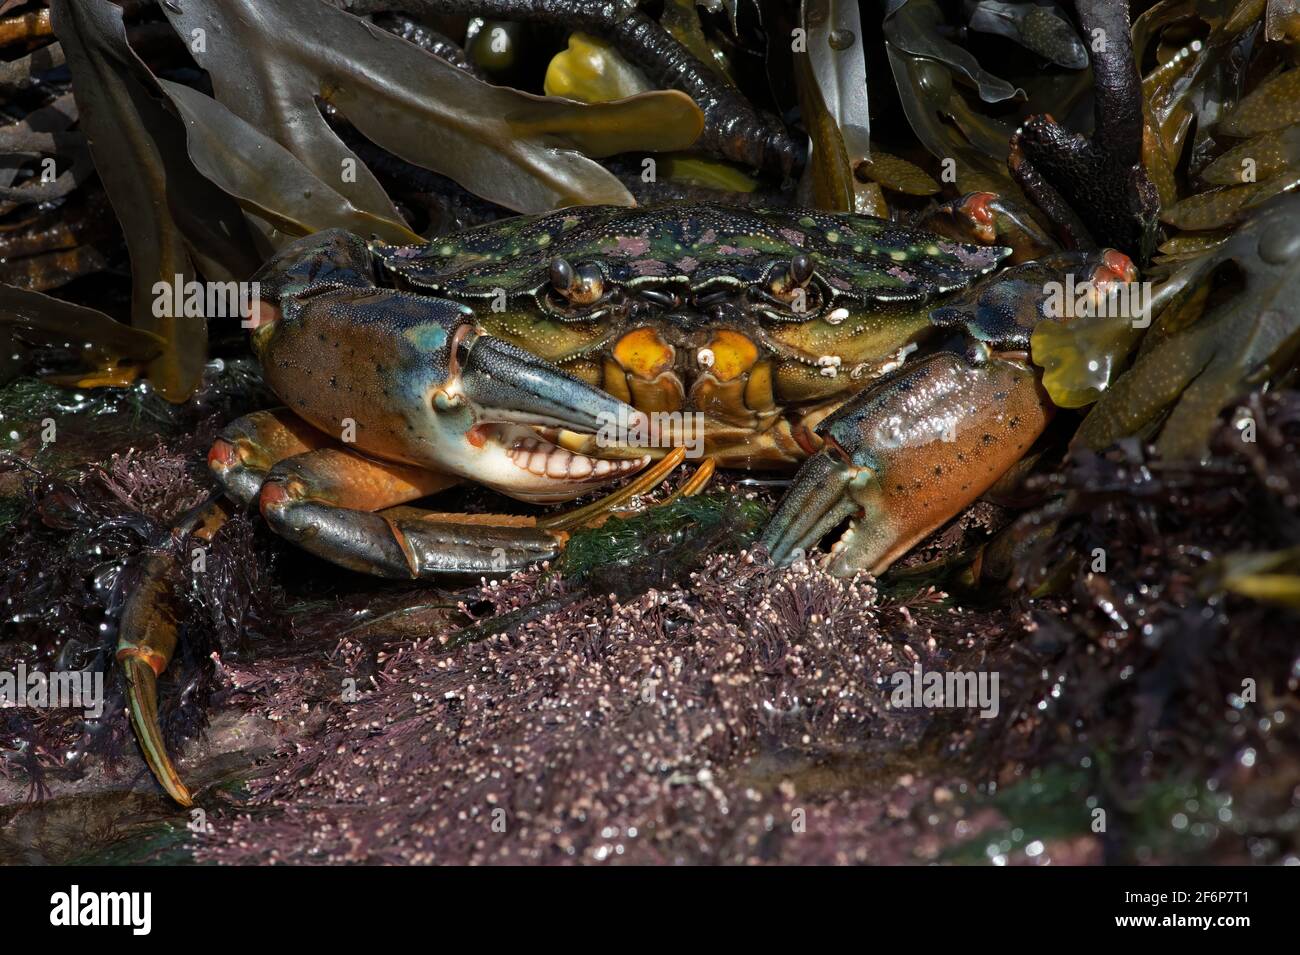 European Green Crab (Carcinus maenas), 73 individual 1:1 magnification ratio images stacked to give immense detail and depth of field Stock Photo